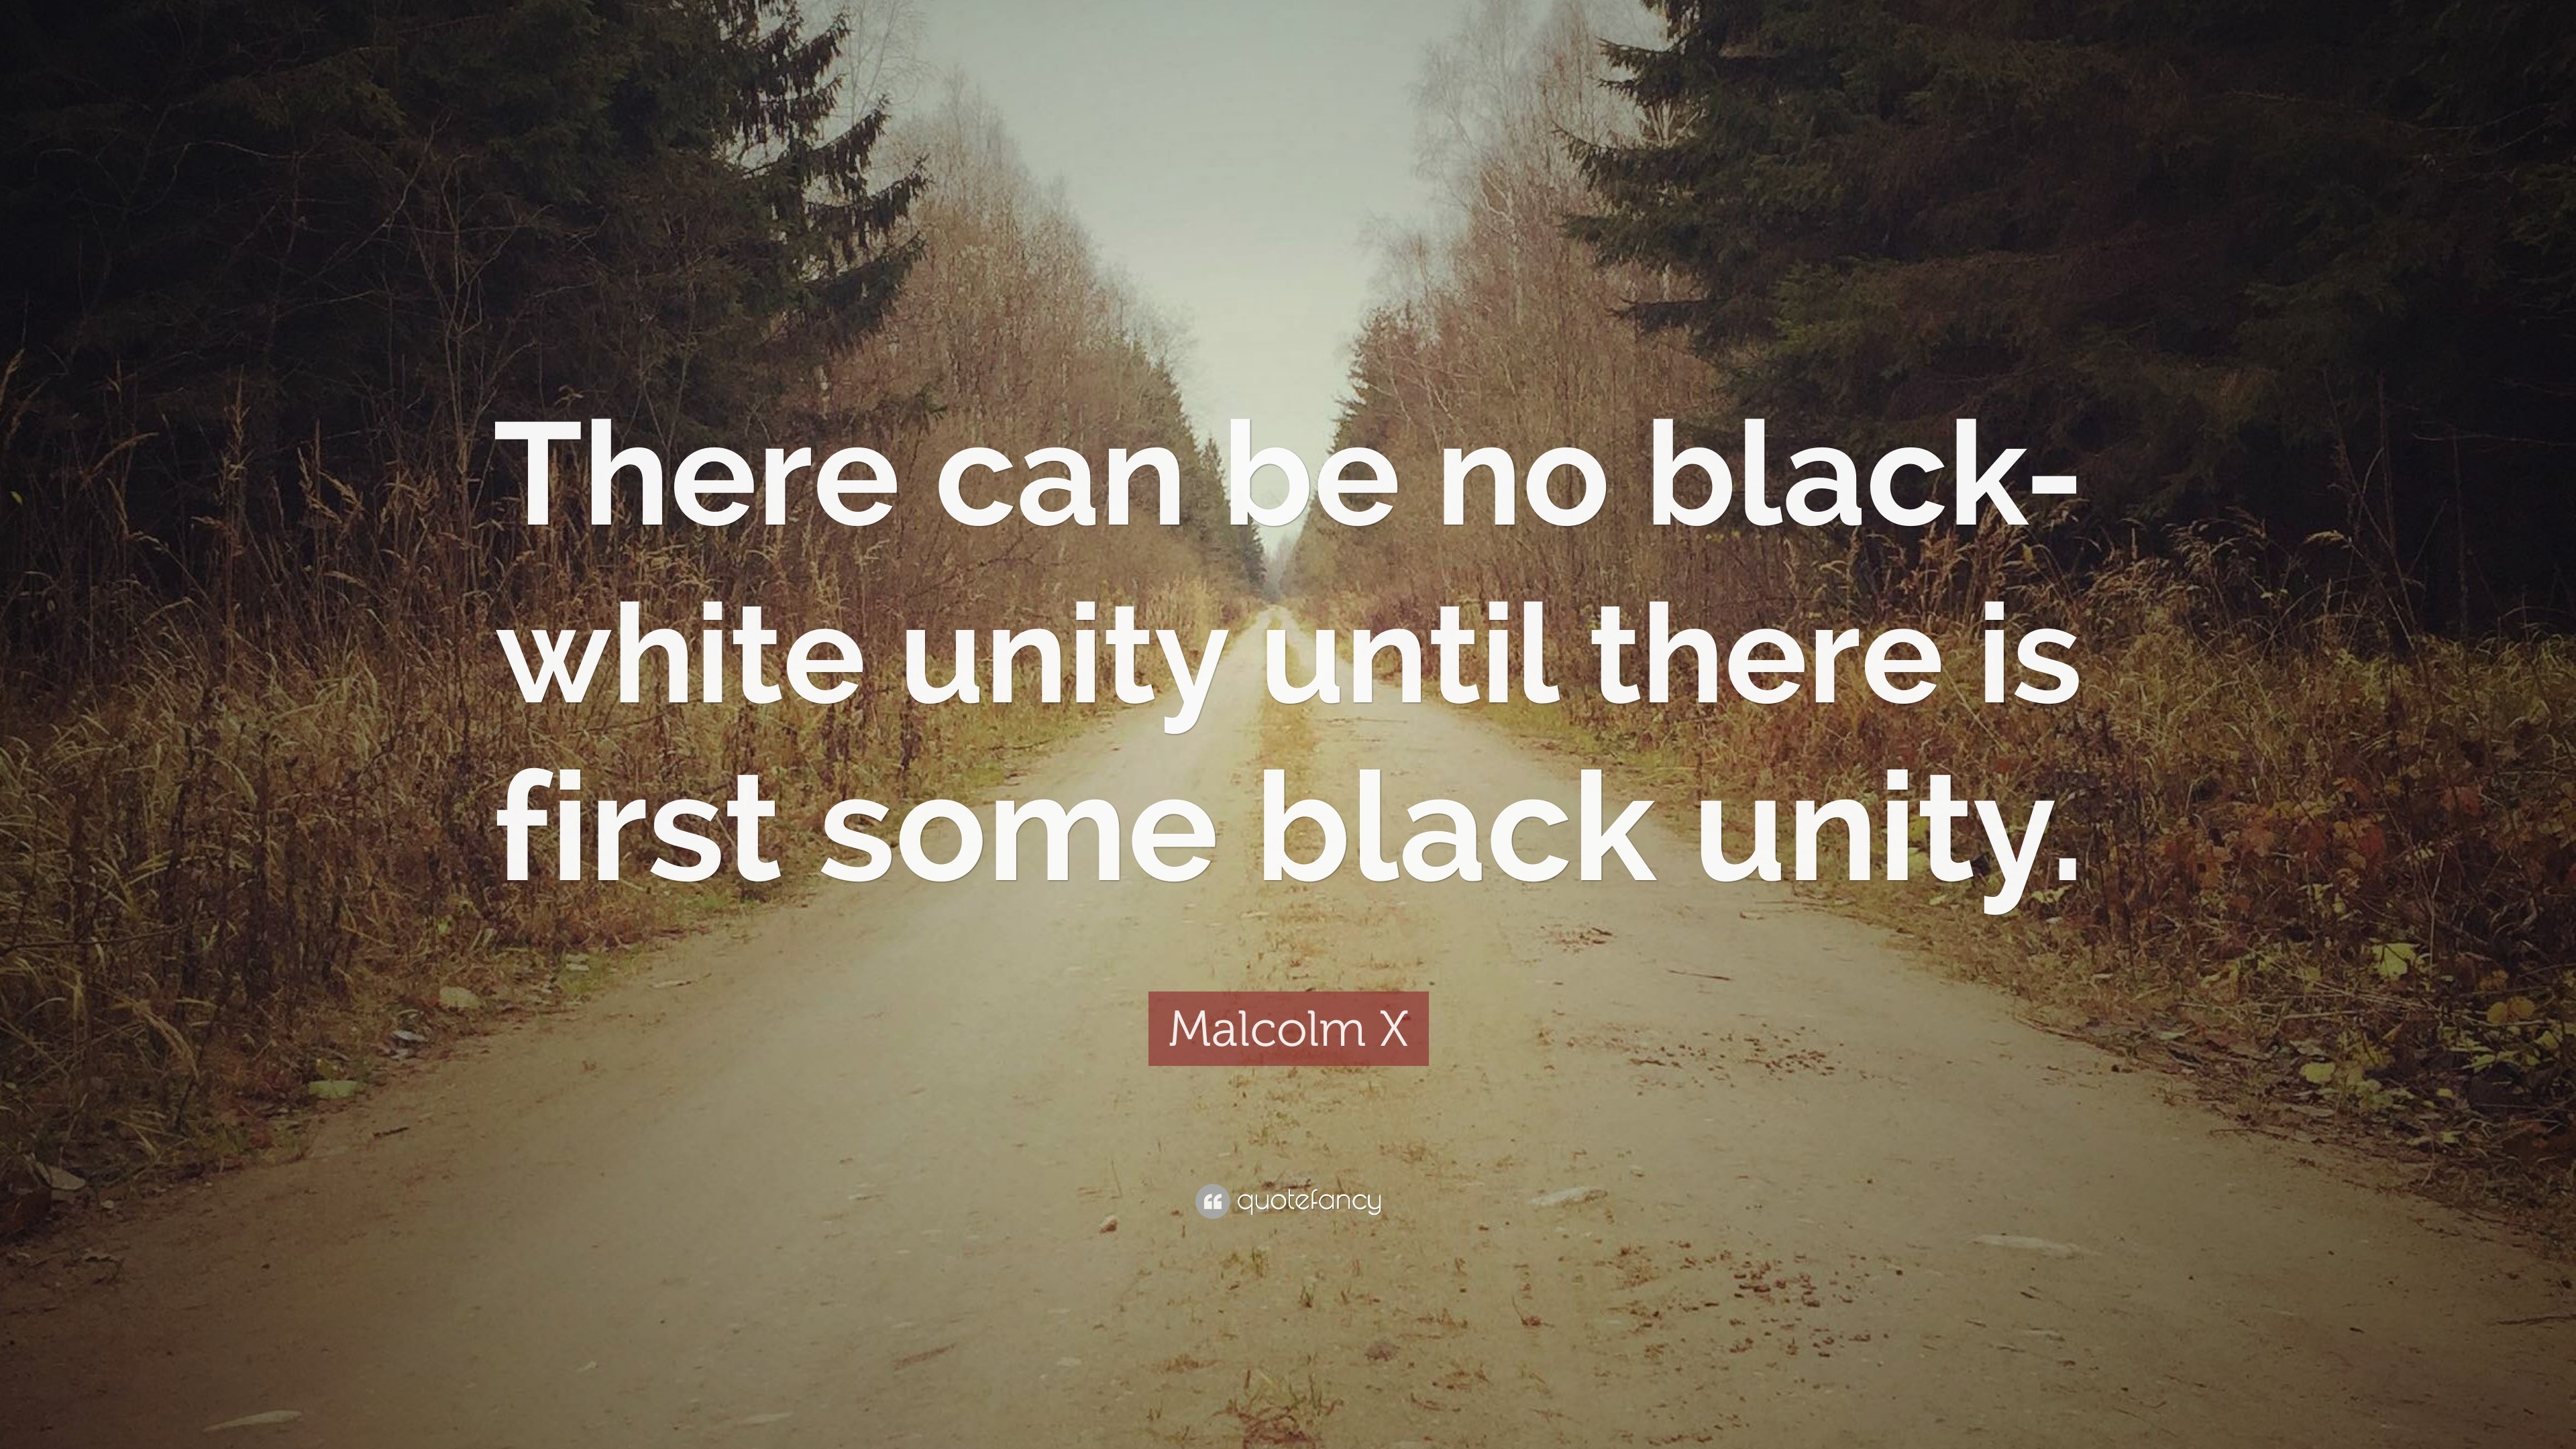 Malcolm X Quote There Can Be No Black White Unity Until There Is First Some Black